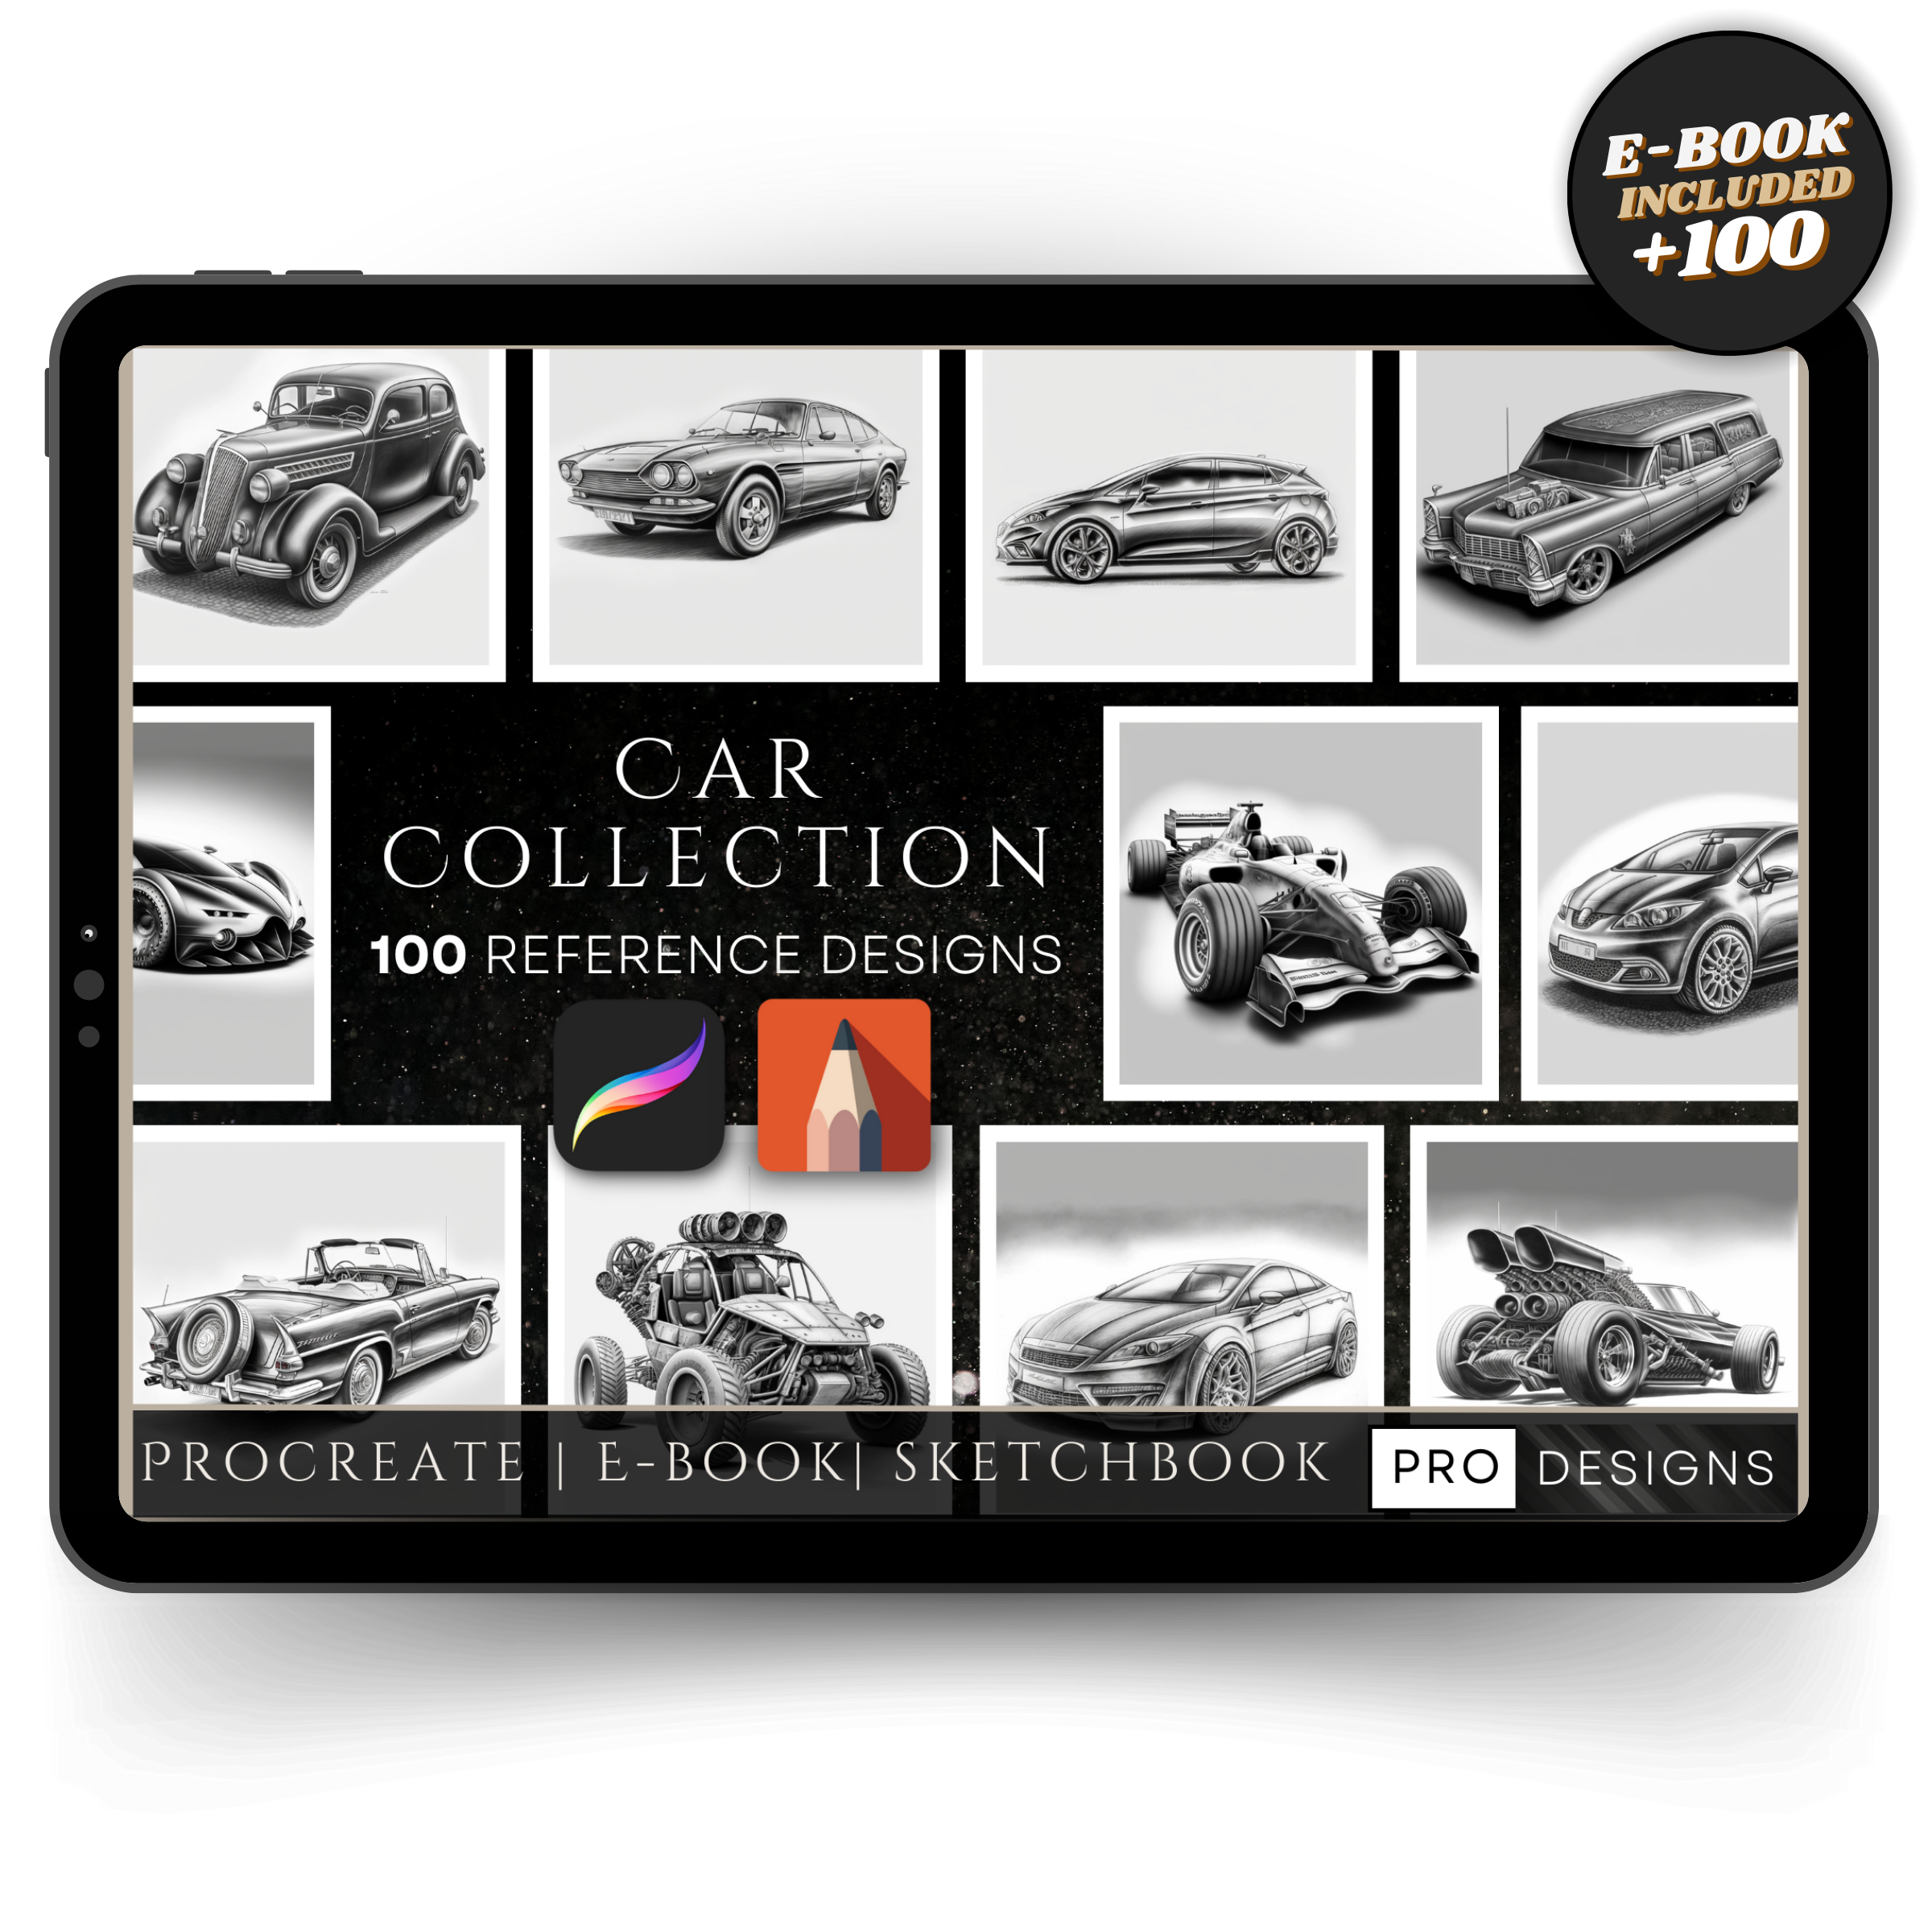 "Car Collection" - Rev Up Your Creativity with High-Octane Designs